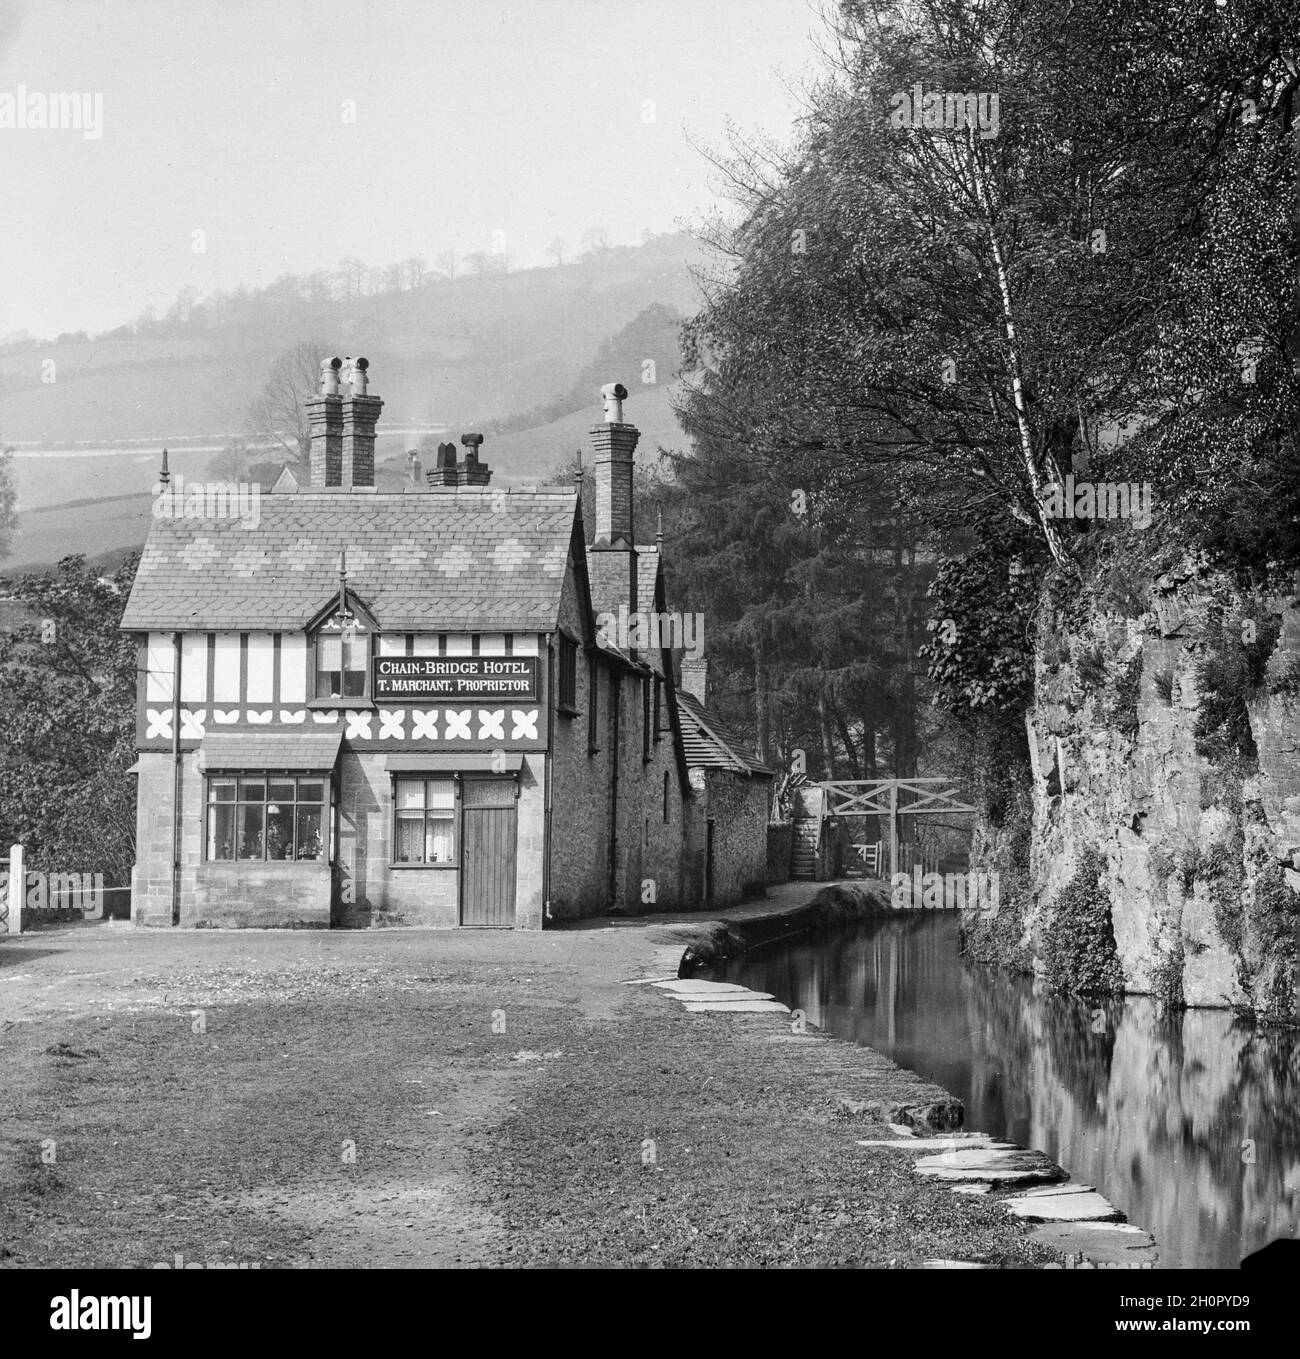 Vintage early 20th Century black and white photograph showing the Chain Bridge Hotel or Chainbridge Hotel on the River Dee,near the town of Llangollen in Wales, UK. Stock Photo